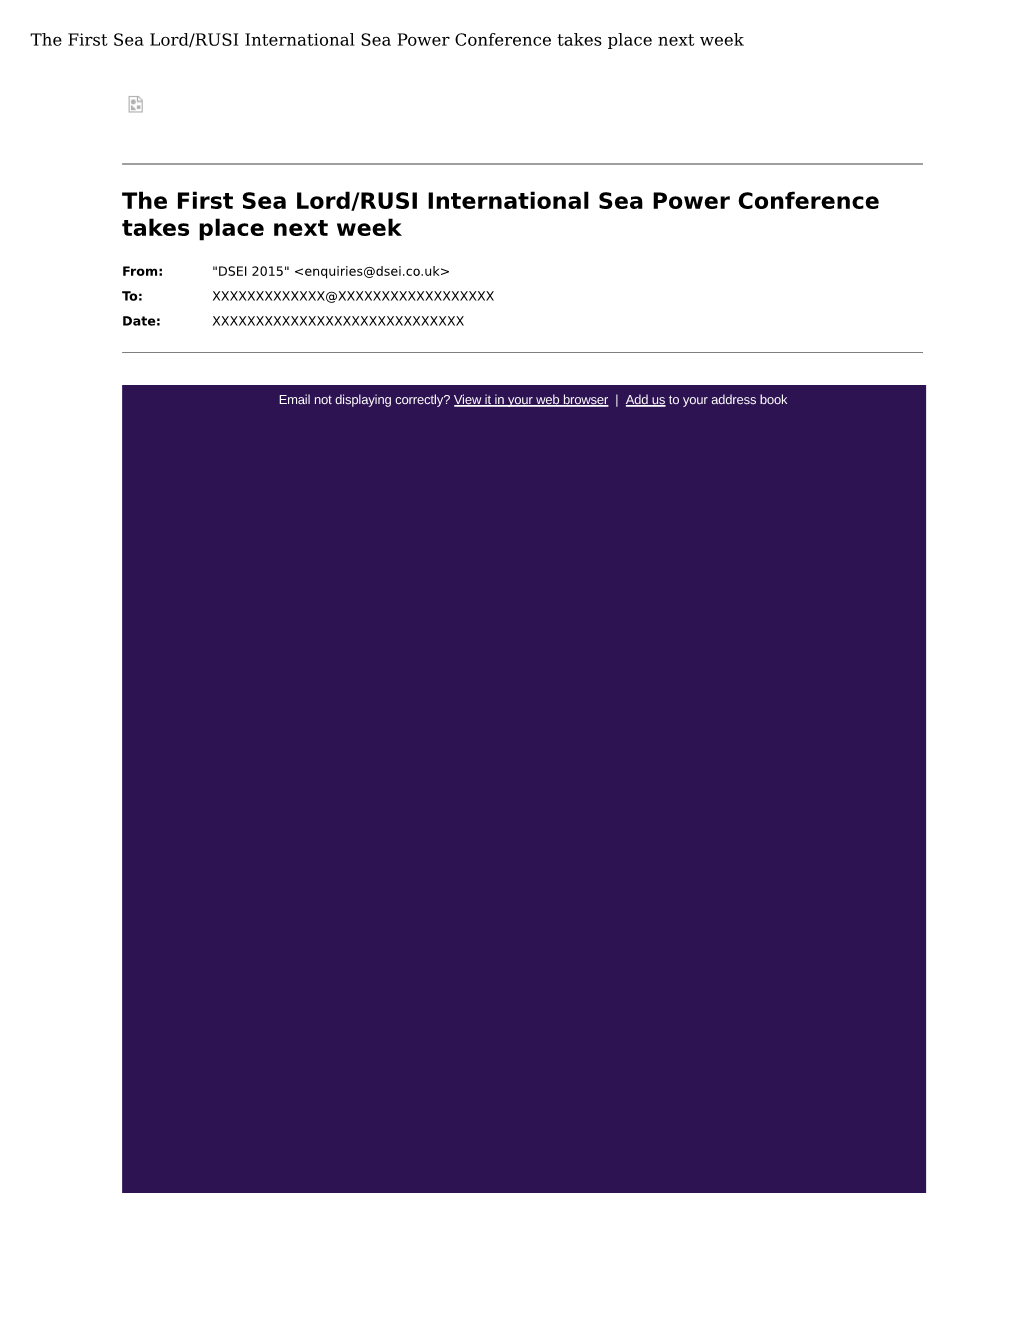 The First Sea Lord/RUSI International Sea Power Conference Takes Place Next Week